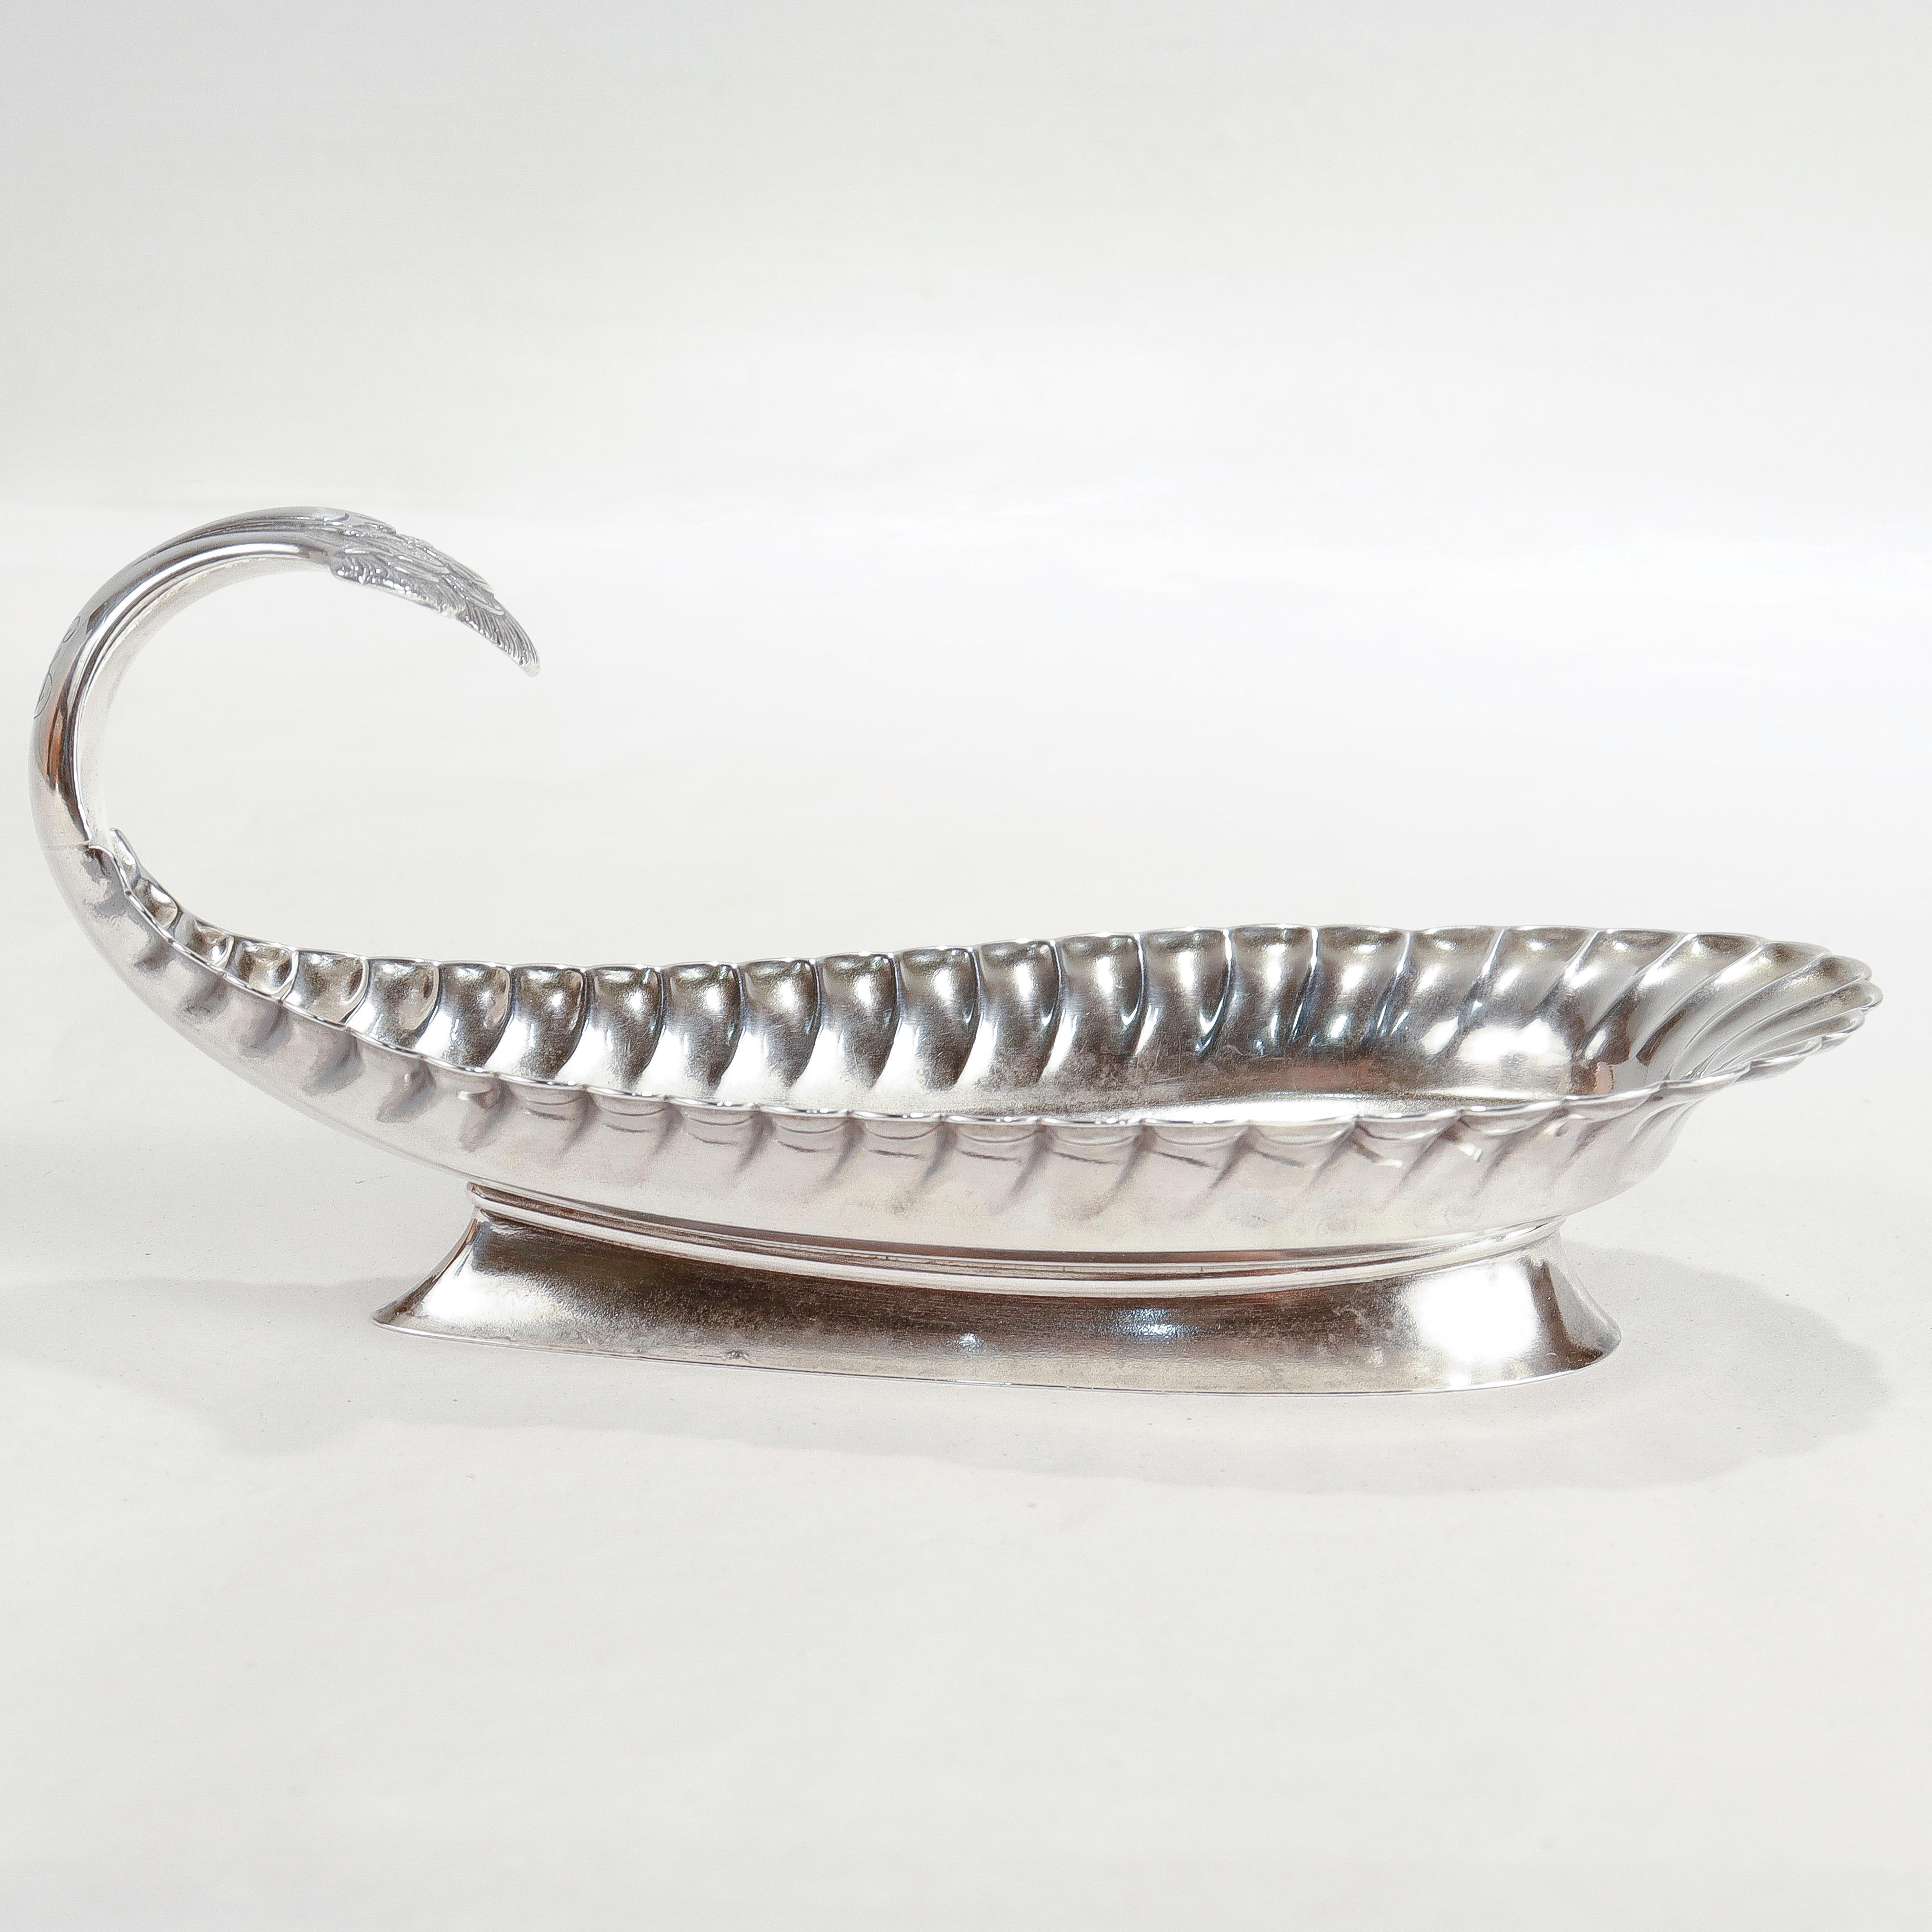 Tiffany & Co. Aesthetic Sterling Silver Stylized Peacock Tail Footed Bonbon Dish In Good Condition For Sale In Philadelphia, PA